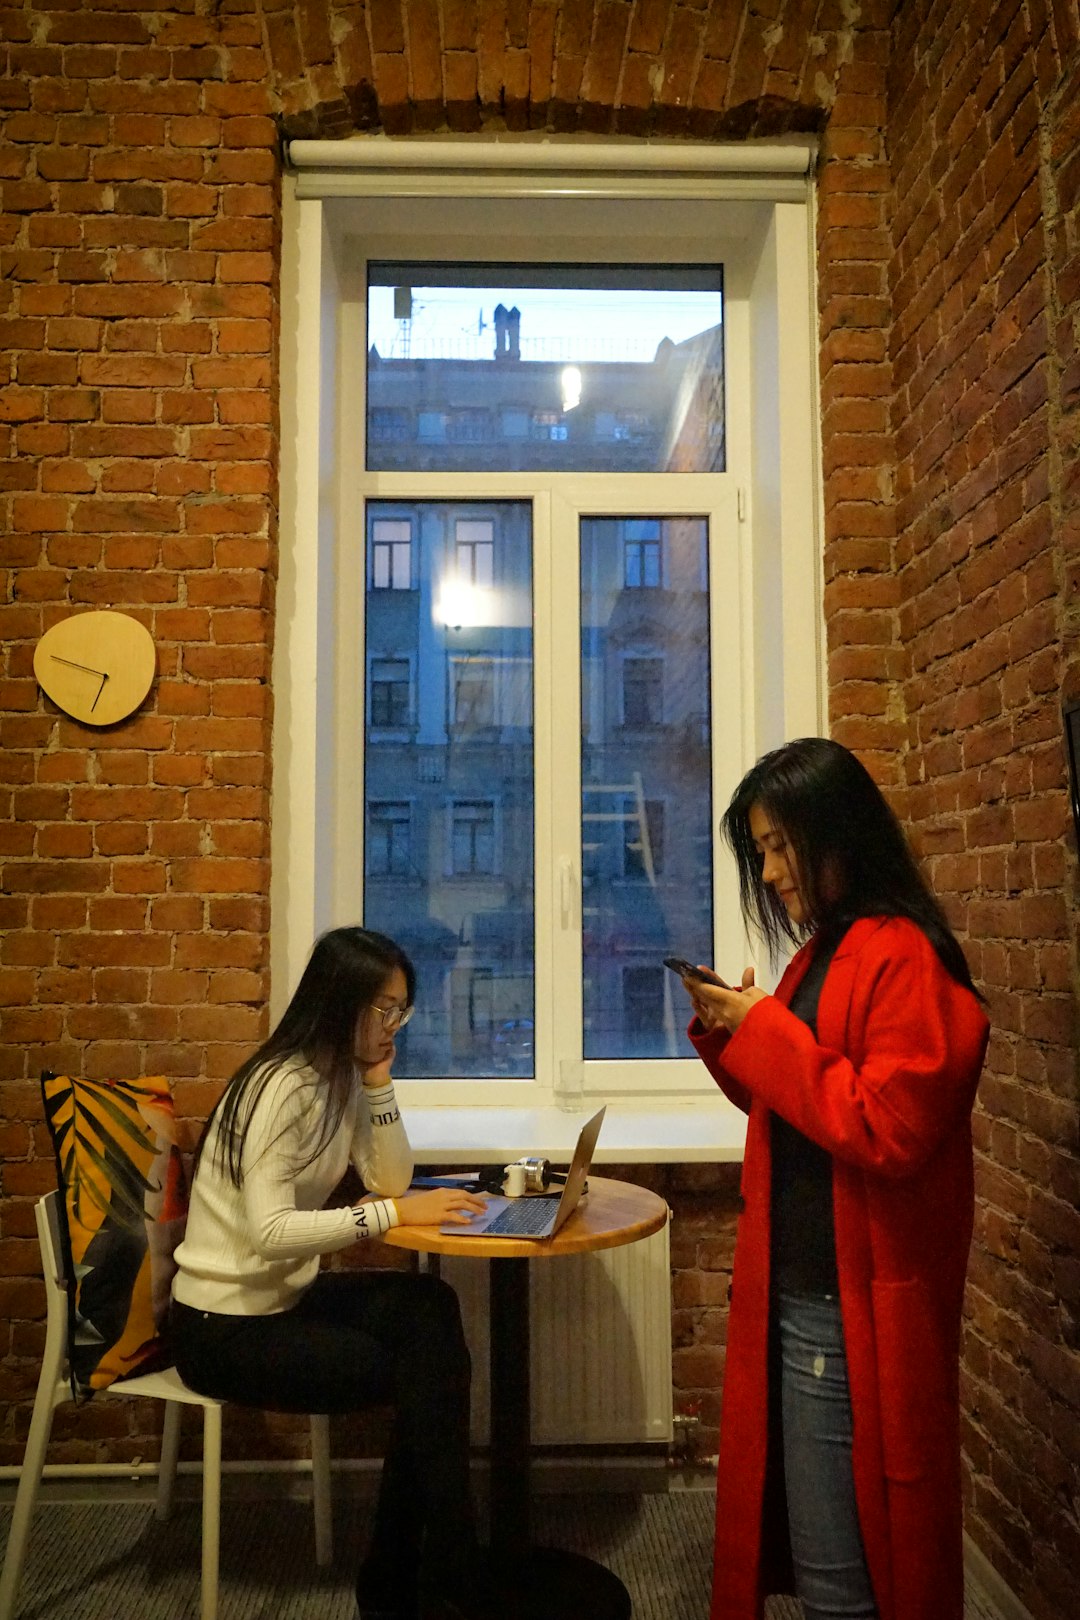 woman with red coat stands near woman at the table near window